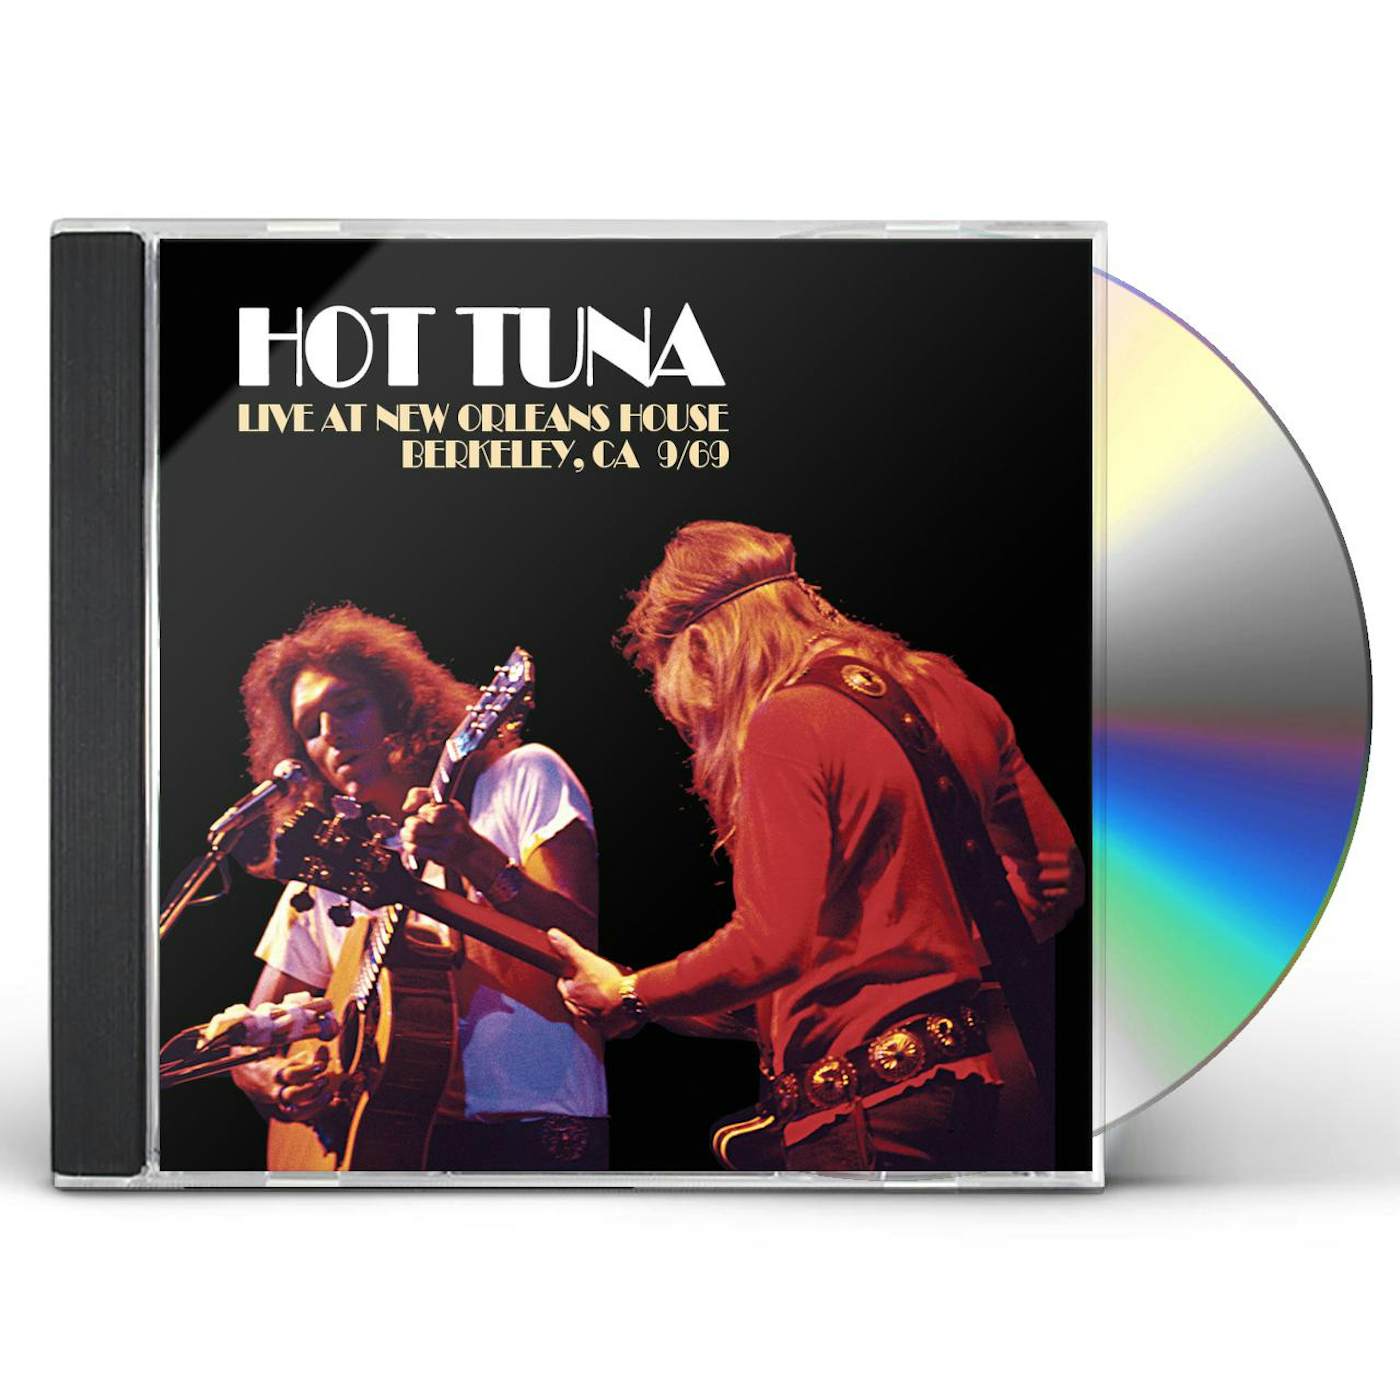 Hot Tuna LIVE AT NEW ORLEANS HOUSE BERKELEY CA 9/69 CD